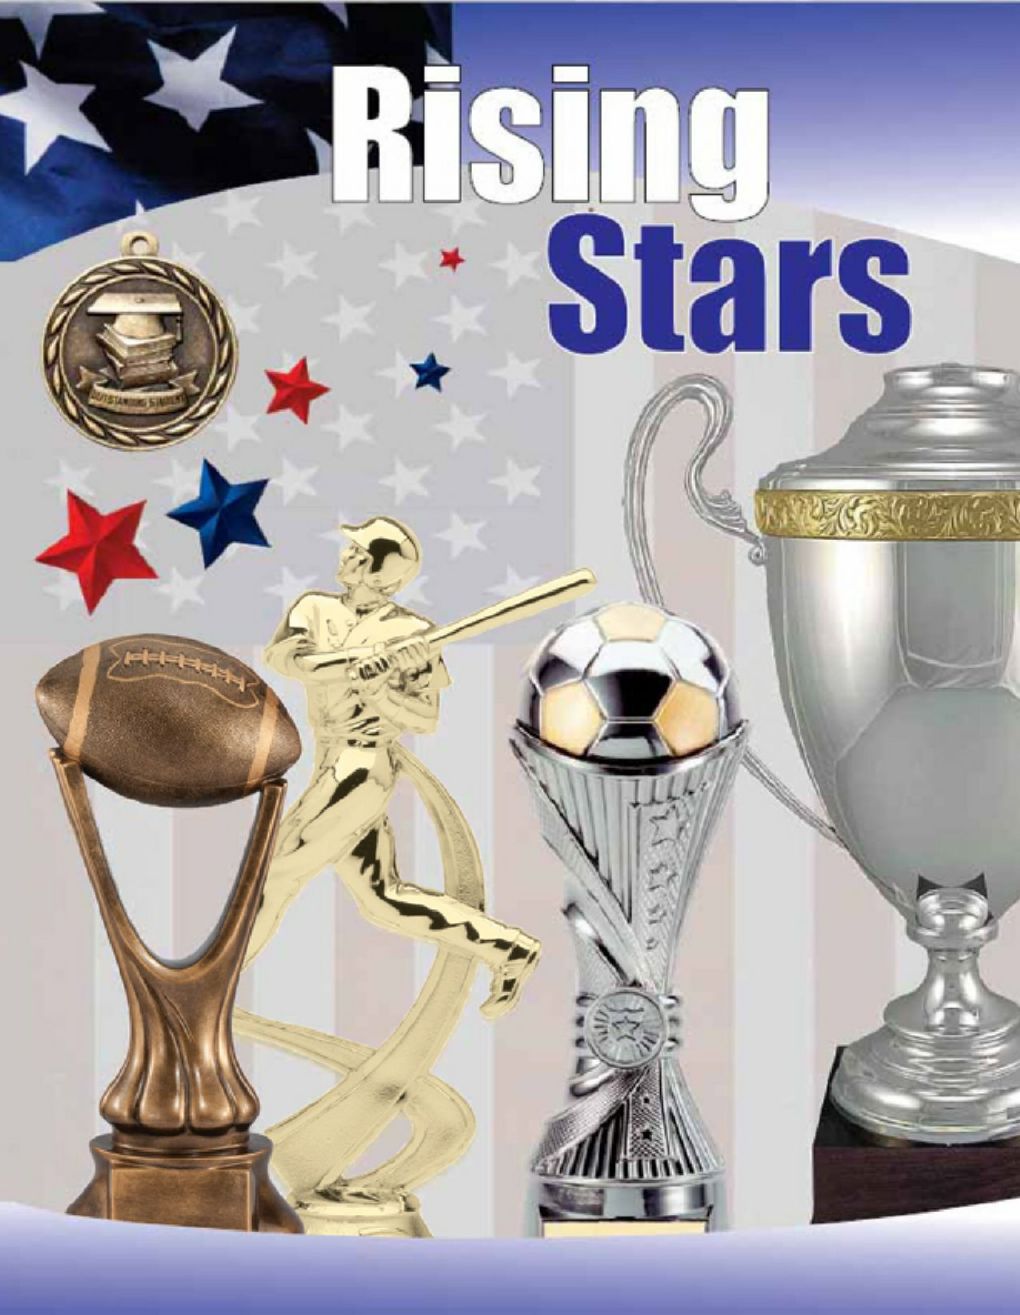 Rising Star Awards
Sports Trophies & Medals
Click for catalog